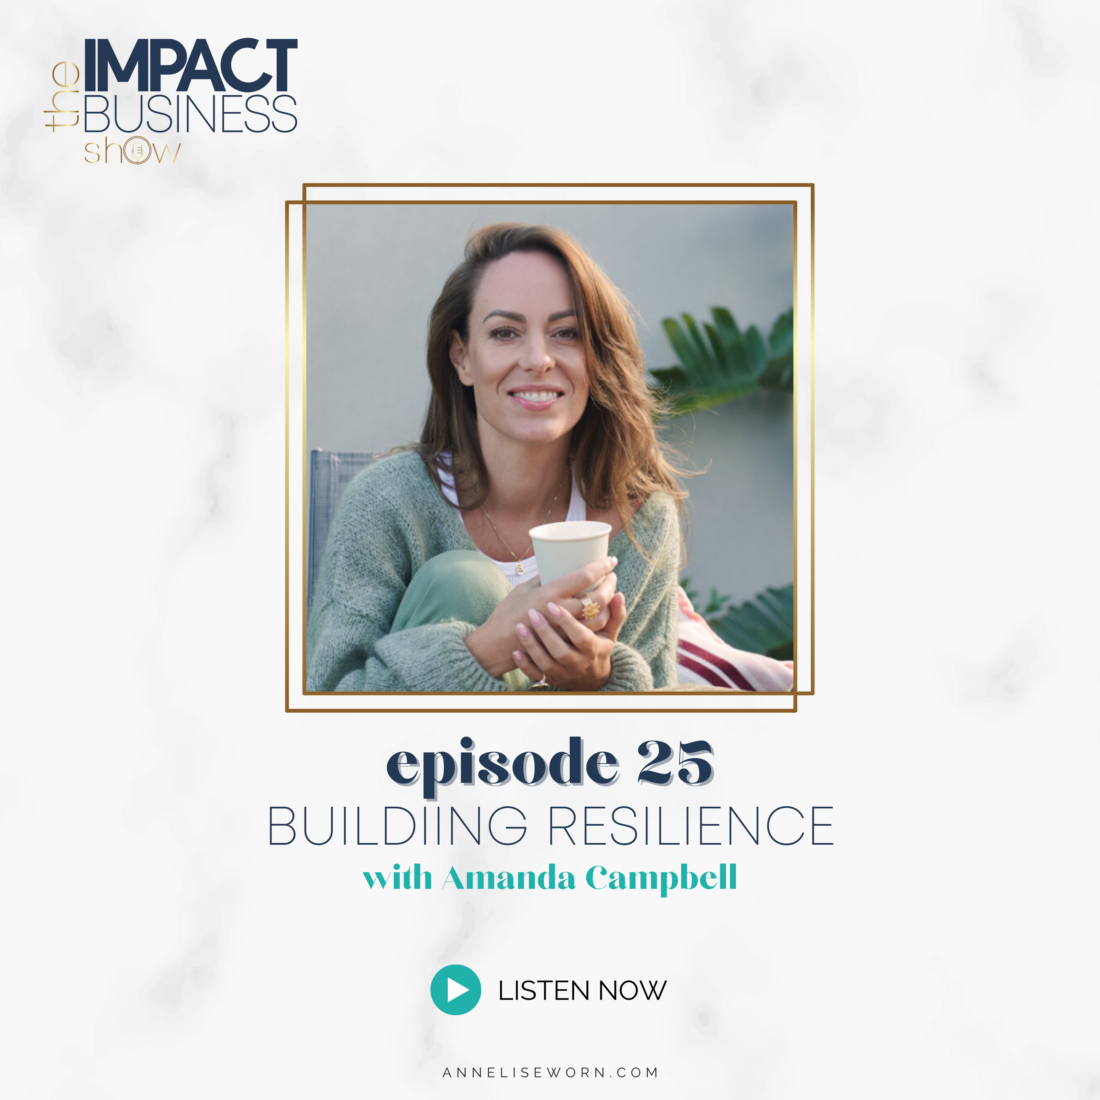 Impact Business Show Episode 25: Building Resilience